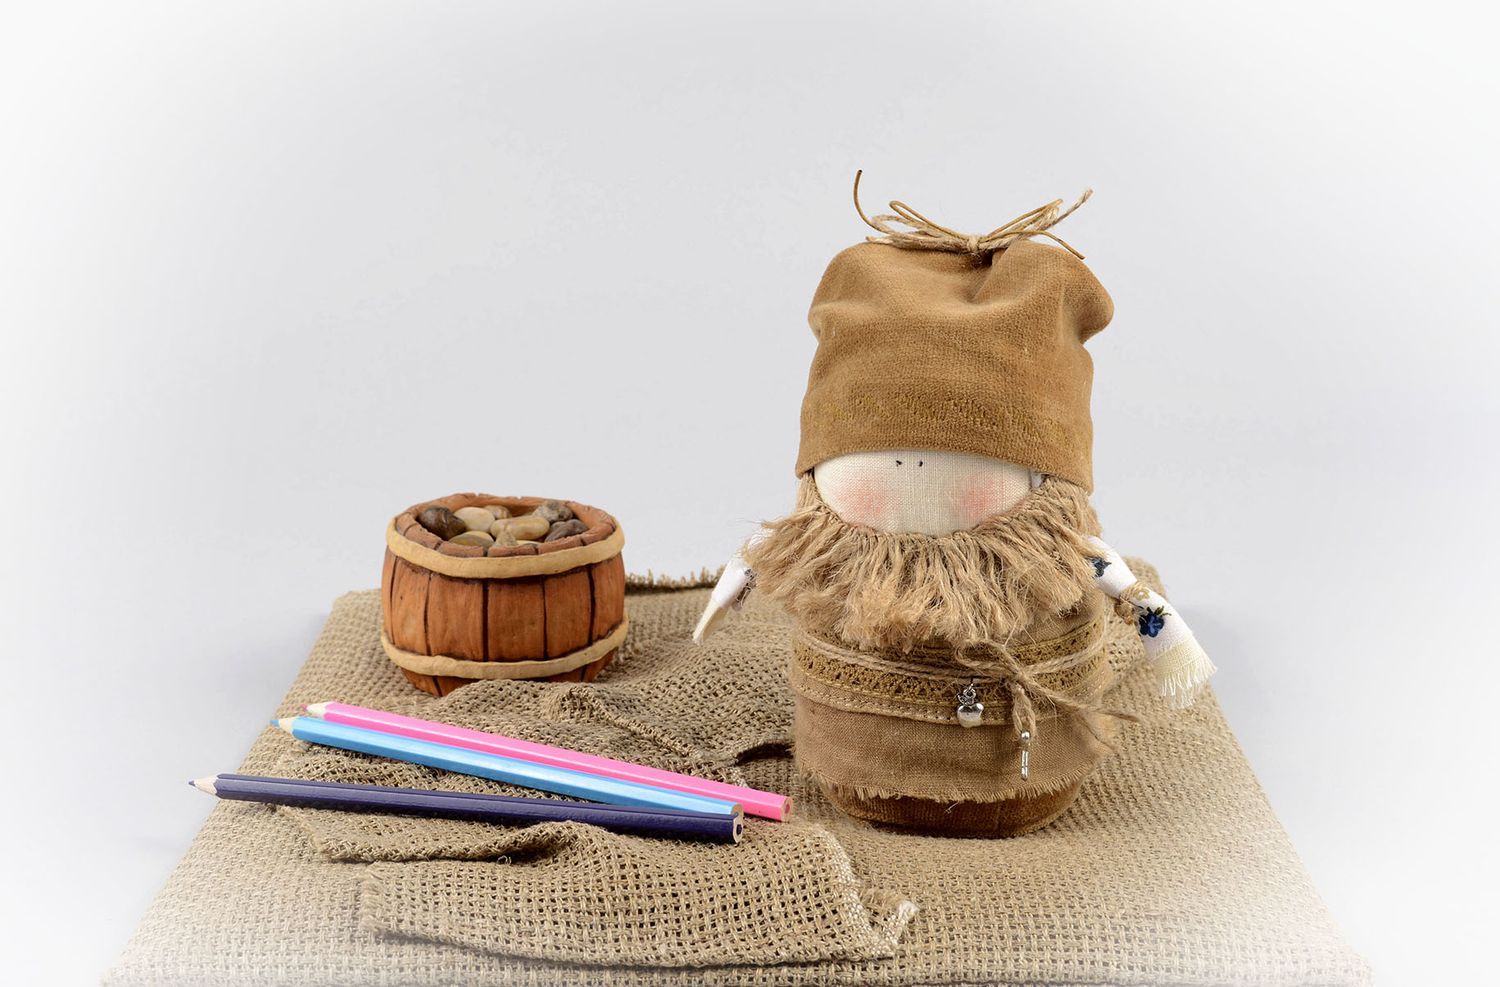 Handmade doll interior decor primitive doll for decorative use only cool gifts photo 5